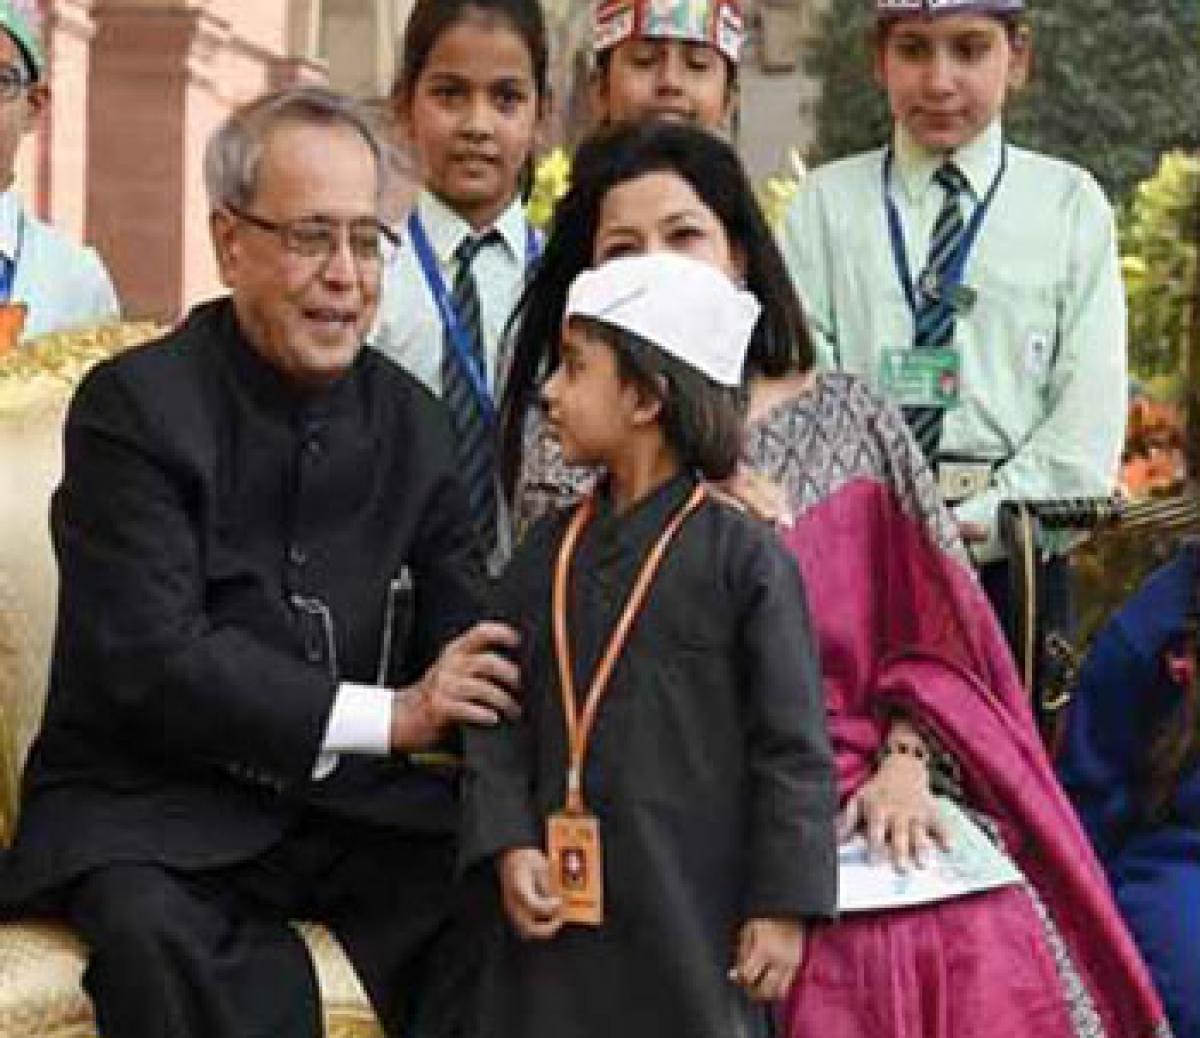 Encourage kids to dream big about country: President